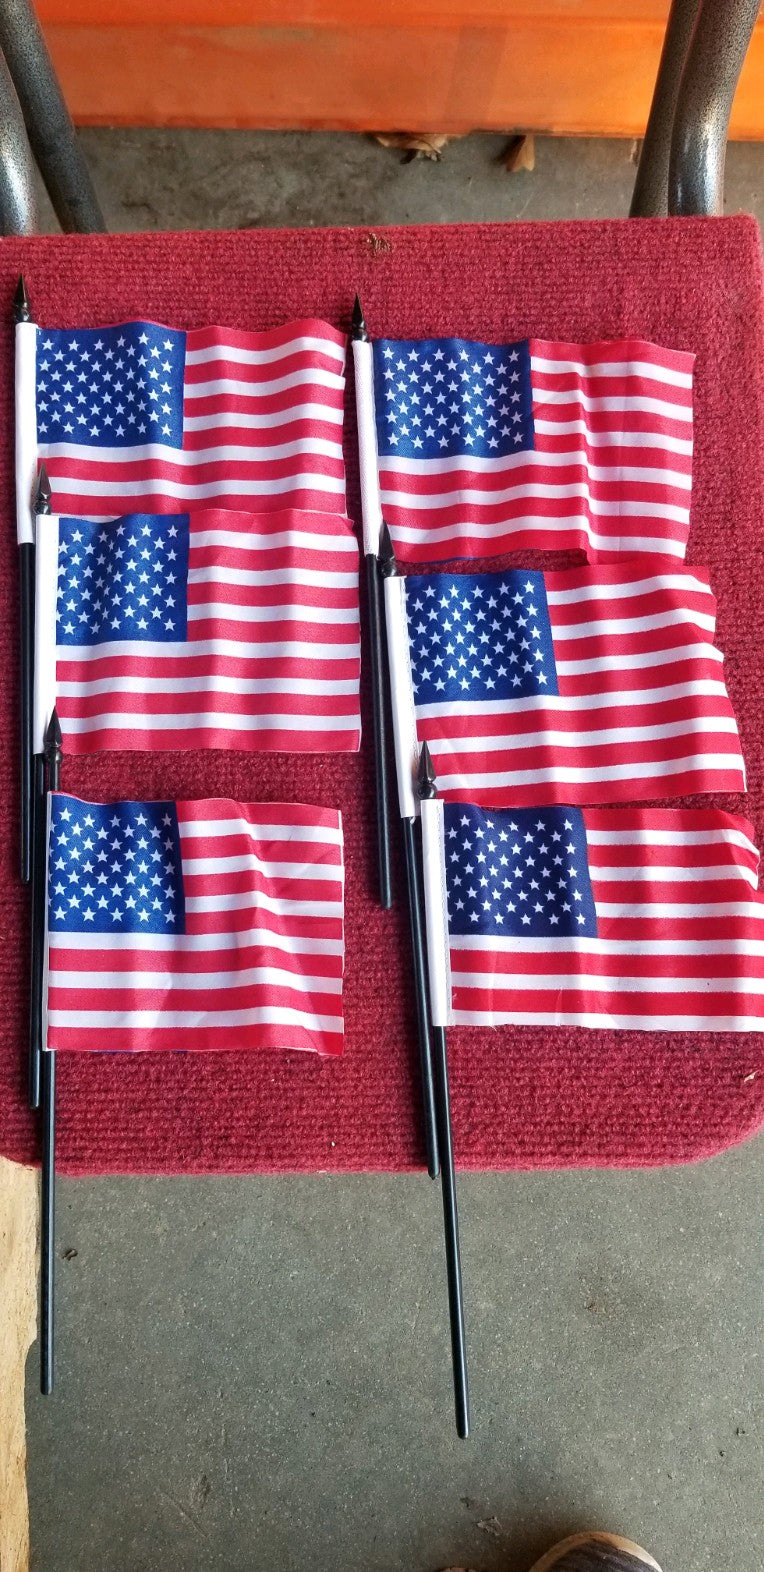 2400 USA 4x6 inches Stick Flags Dura-Lite ™ Poly Printed American Flags